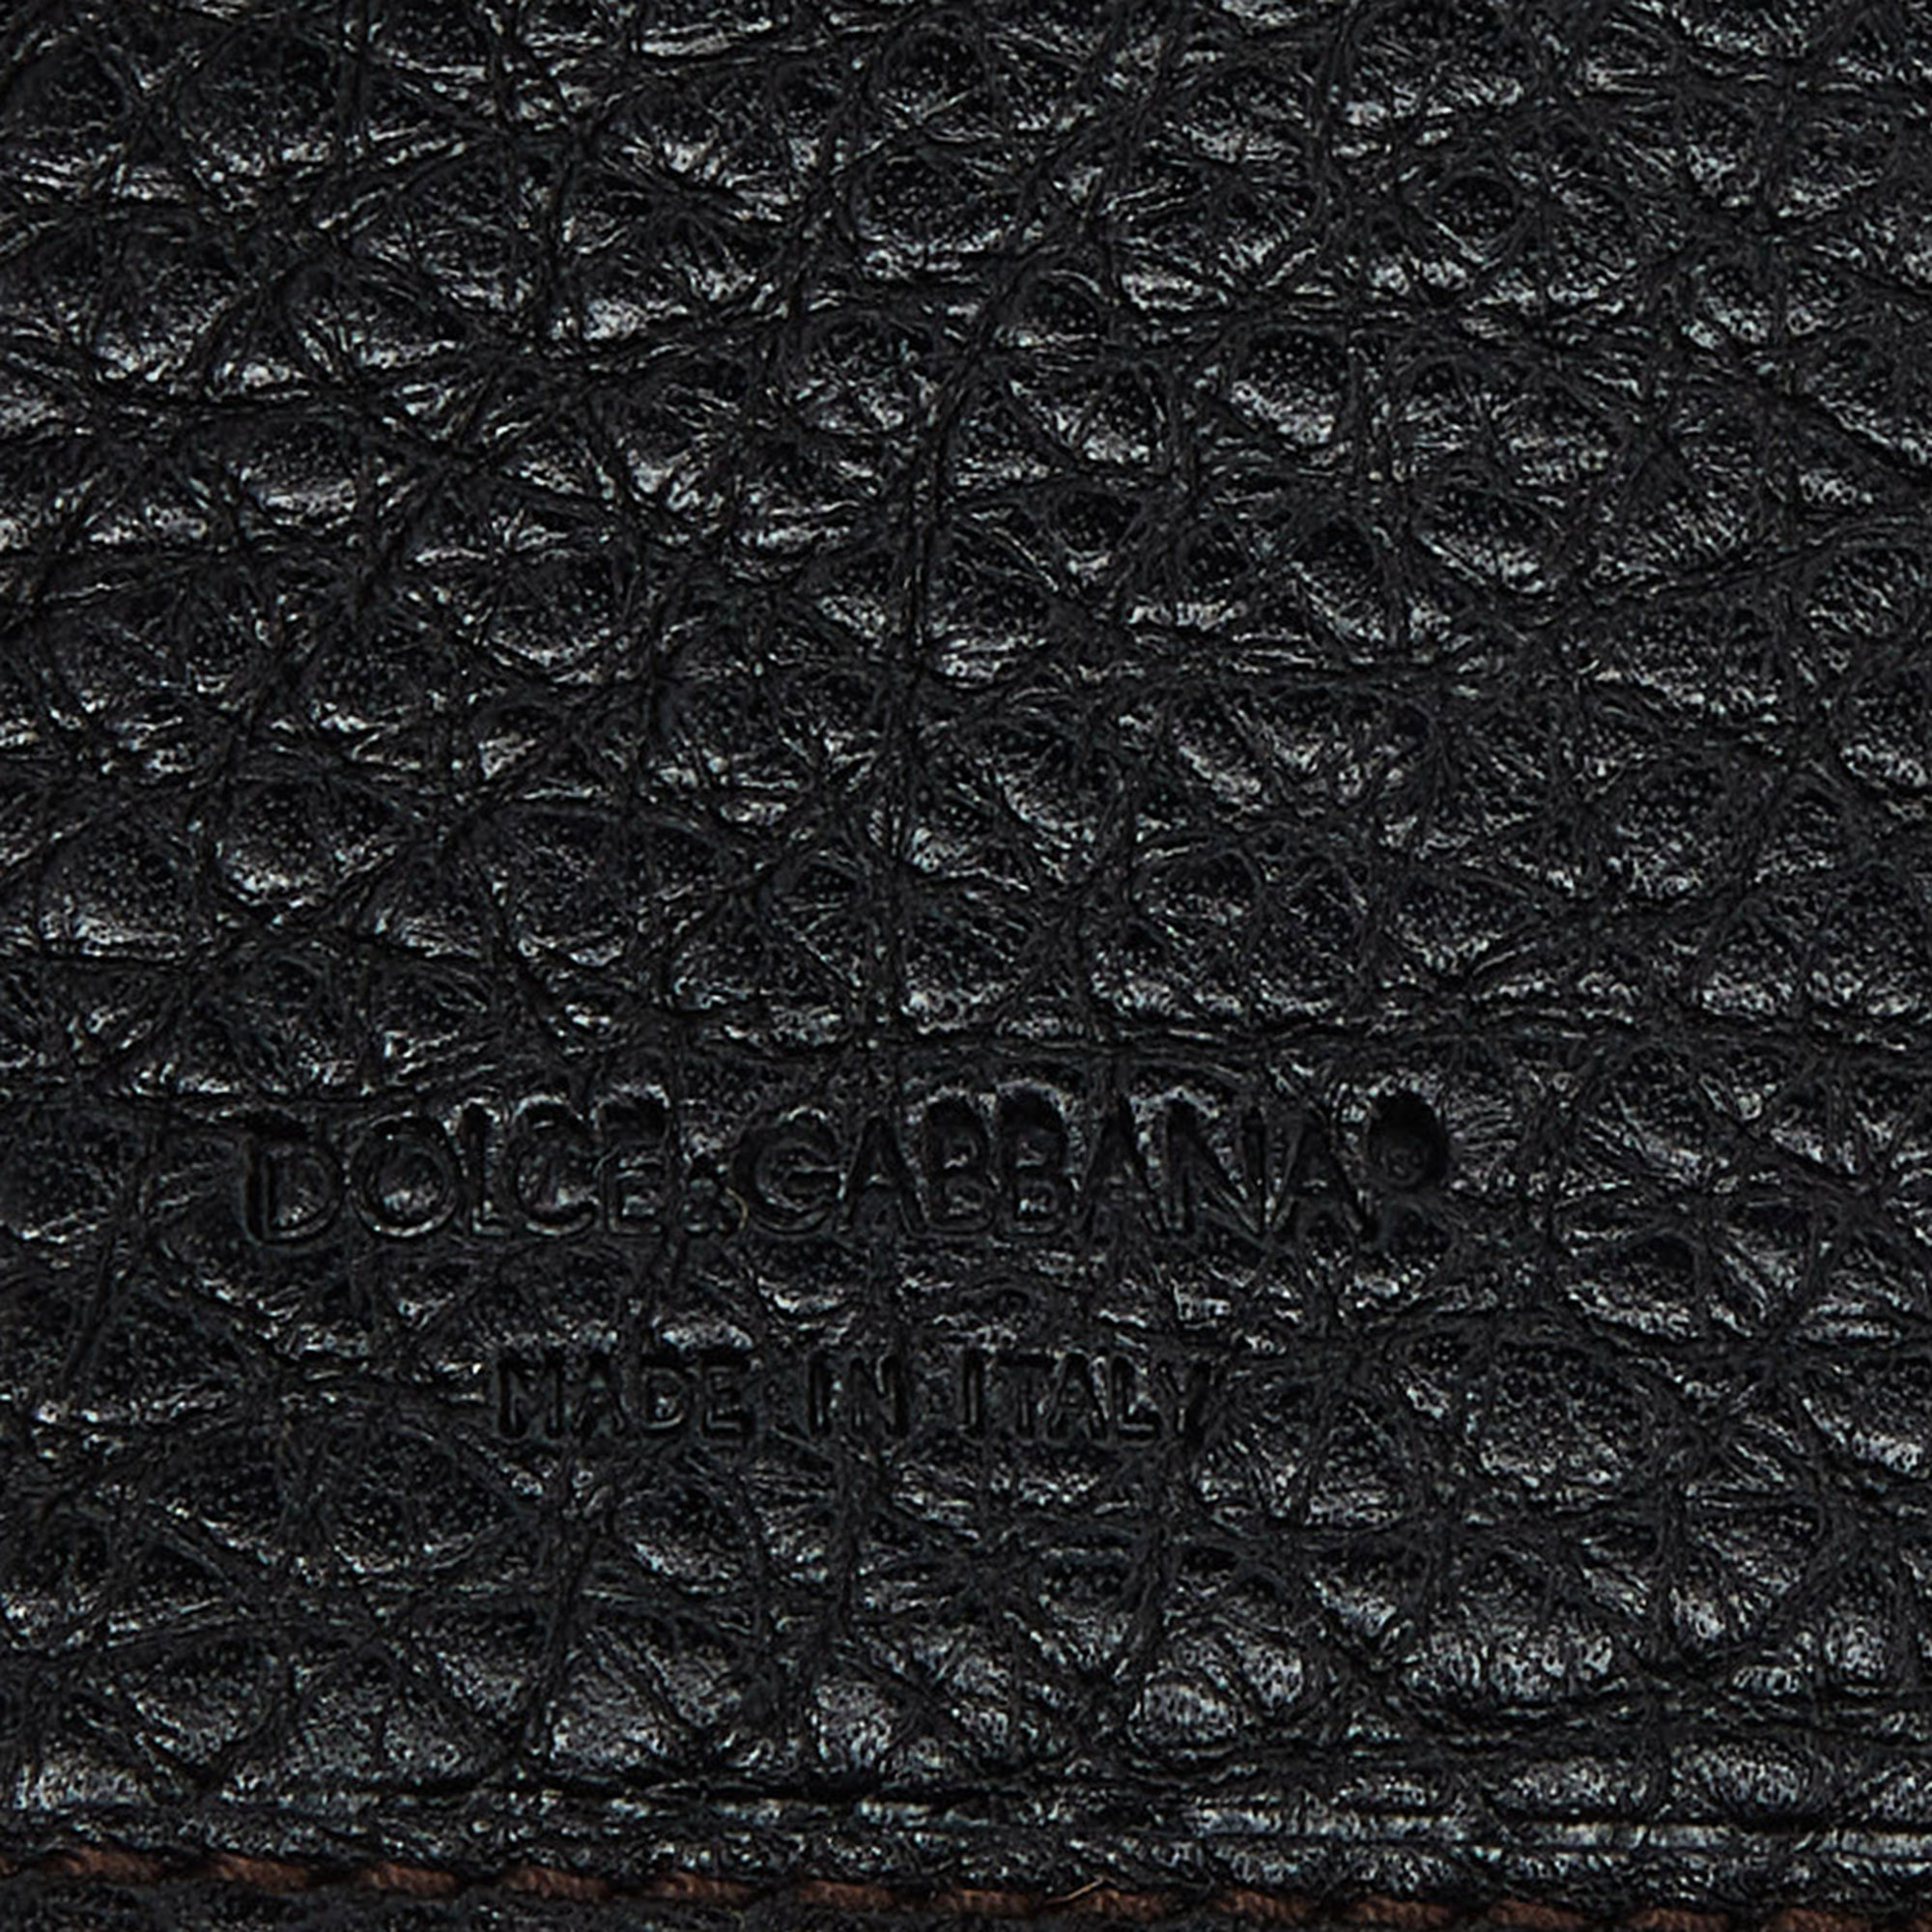 Dolce & Gabbana Brown Leopard Print Calfhair And Leather French Wallet